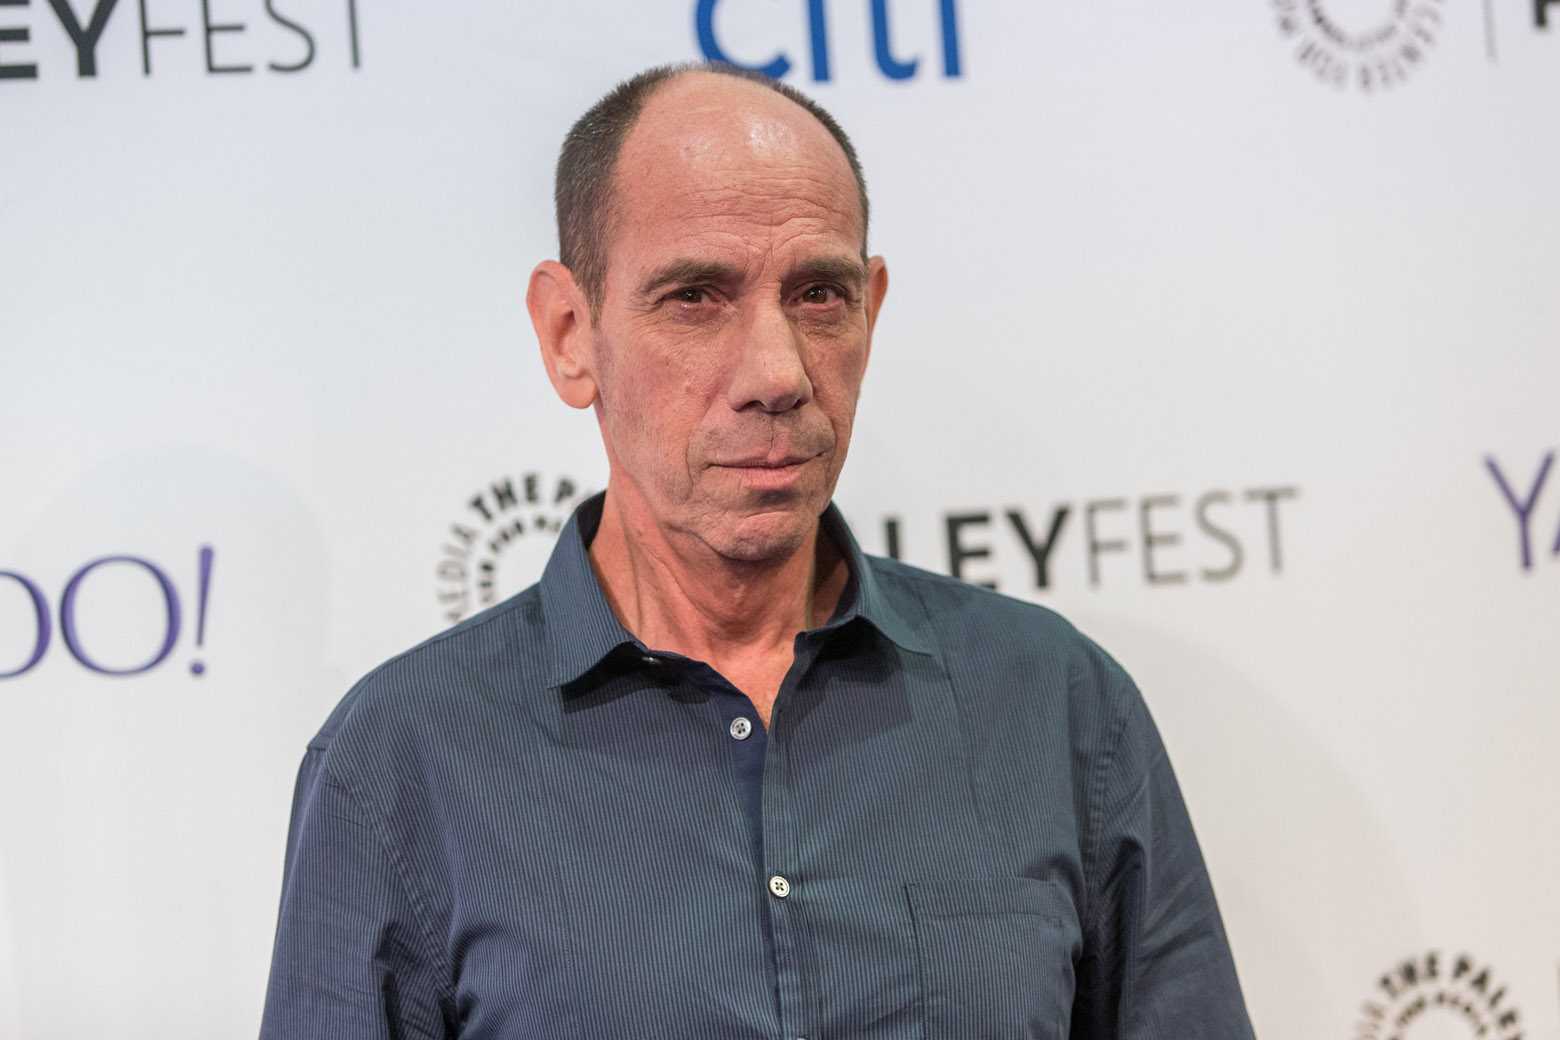 Miguel Ferrer attends the at 2015 PaleyFest Fall TV Previews at The Paley Center for Media on Friday, Sept. 11, 2015, in Beverly Hills, Calif. (Photo by Paul A. Hebert/Invision/AP)